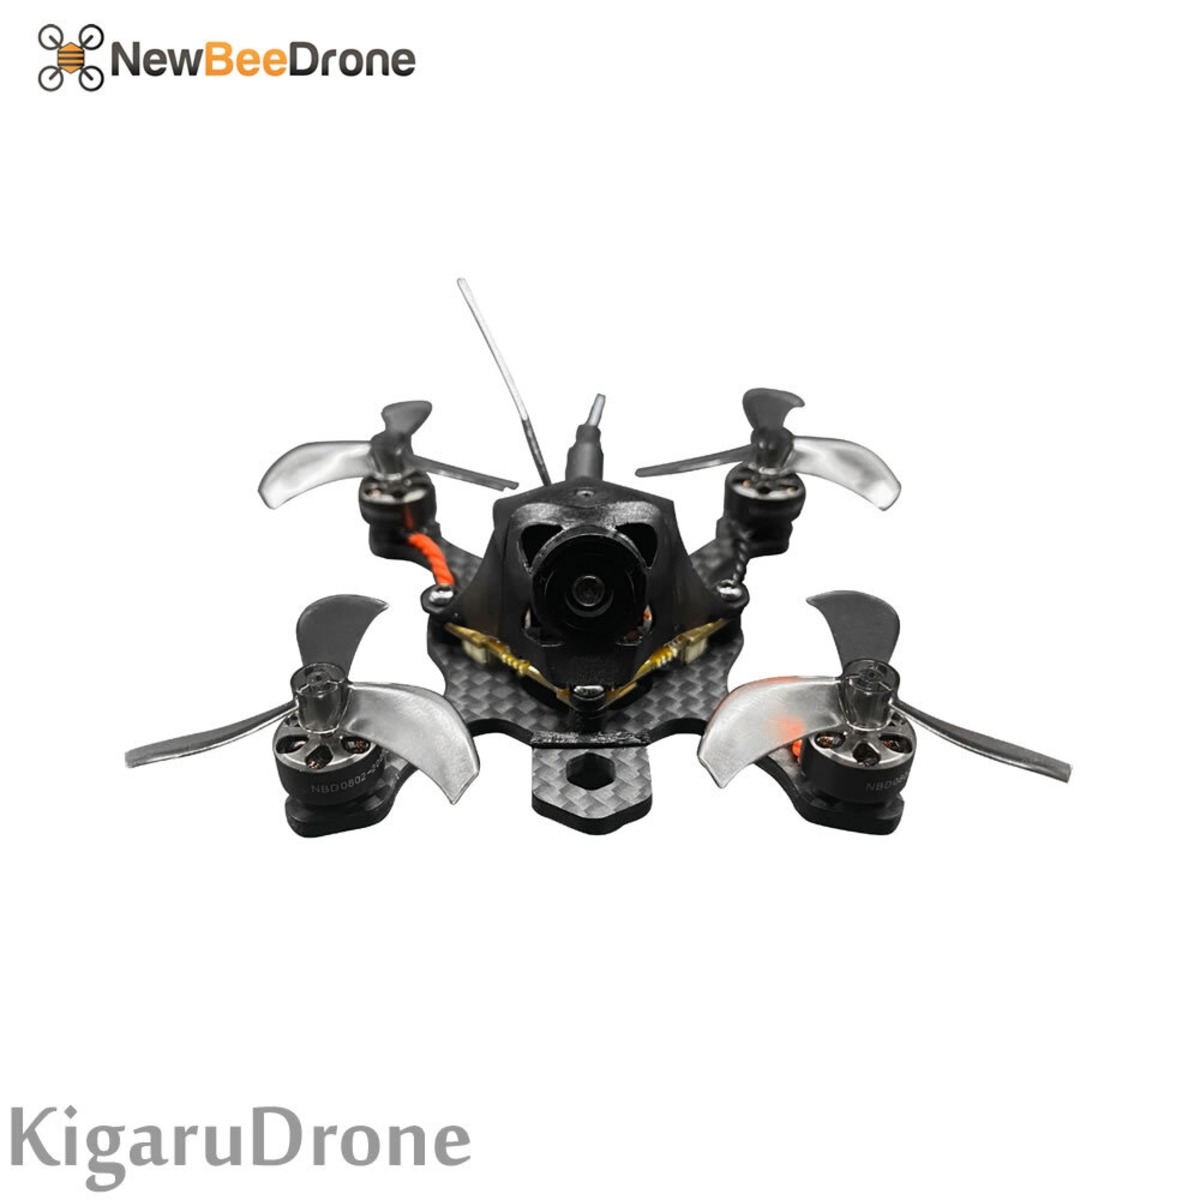 NewBeeDrone Mosquito BLV3 BNF Frsky / S-FHSS | KigaruDrone